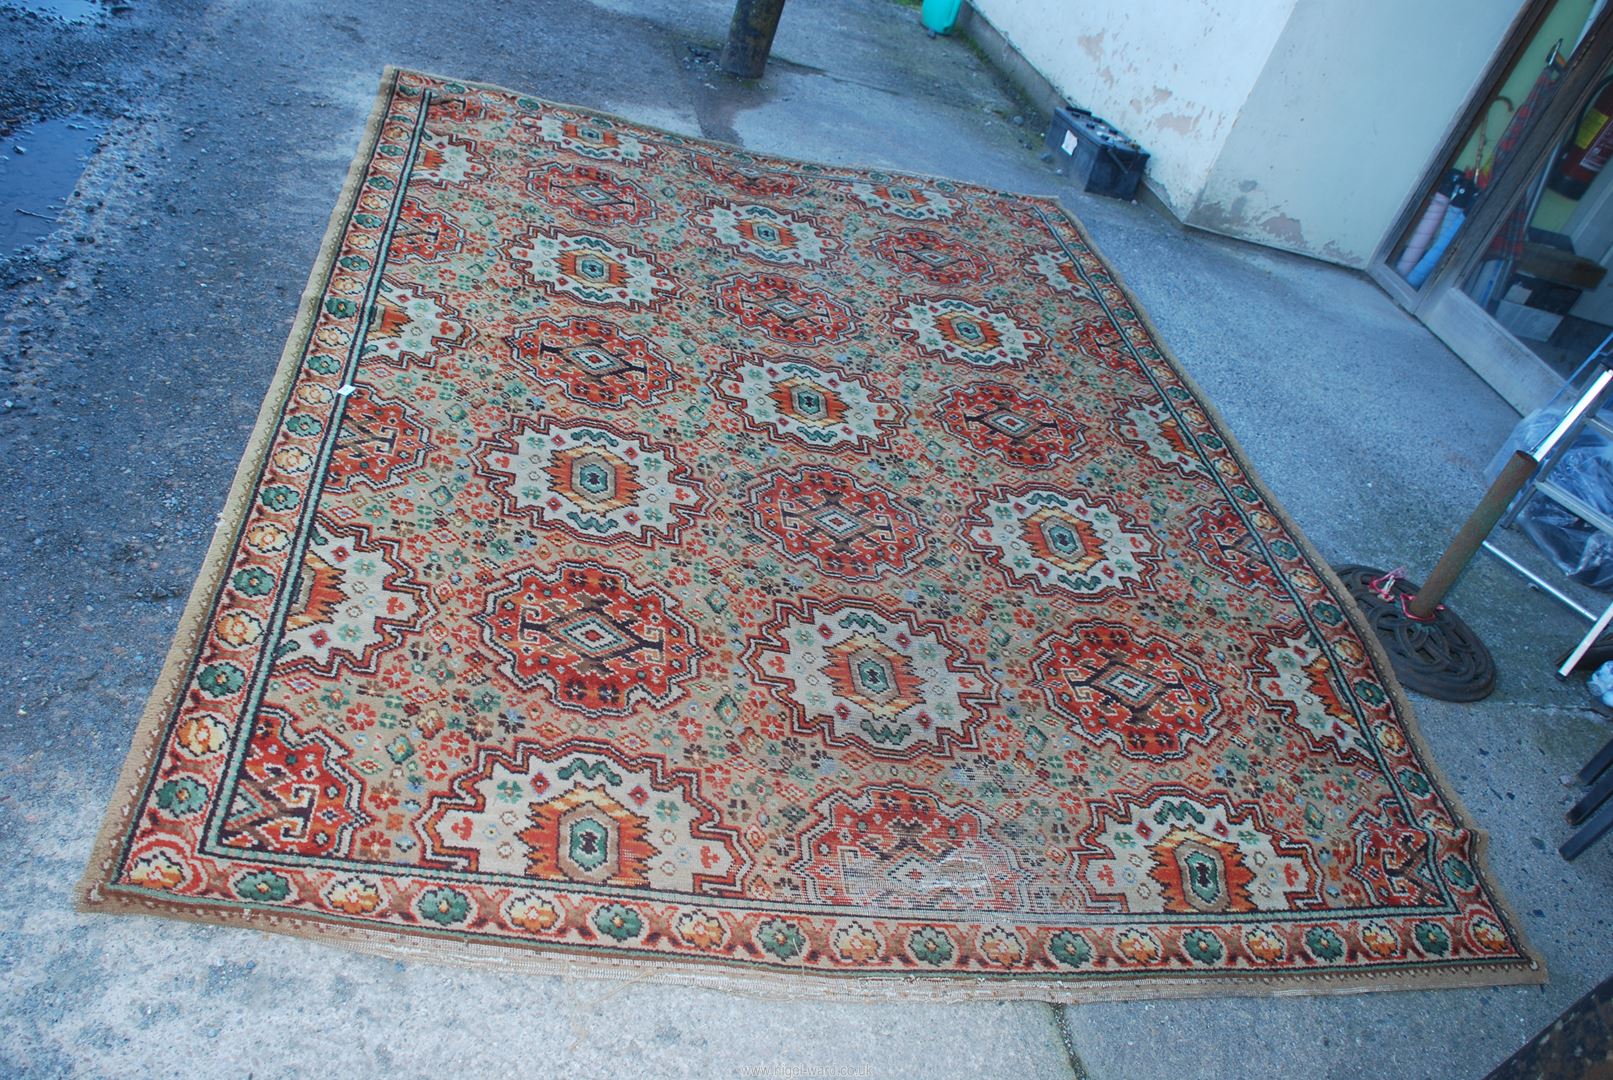 An orange and green rug, some worn areas, 122" x 90".